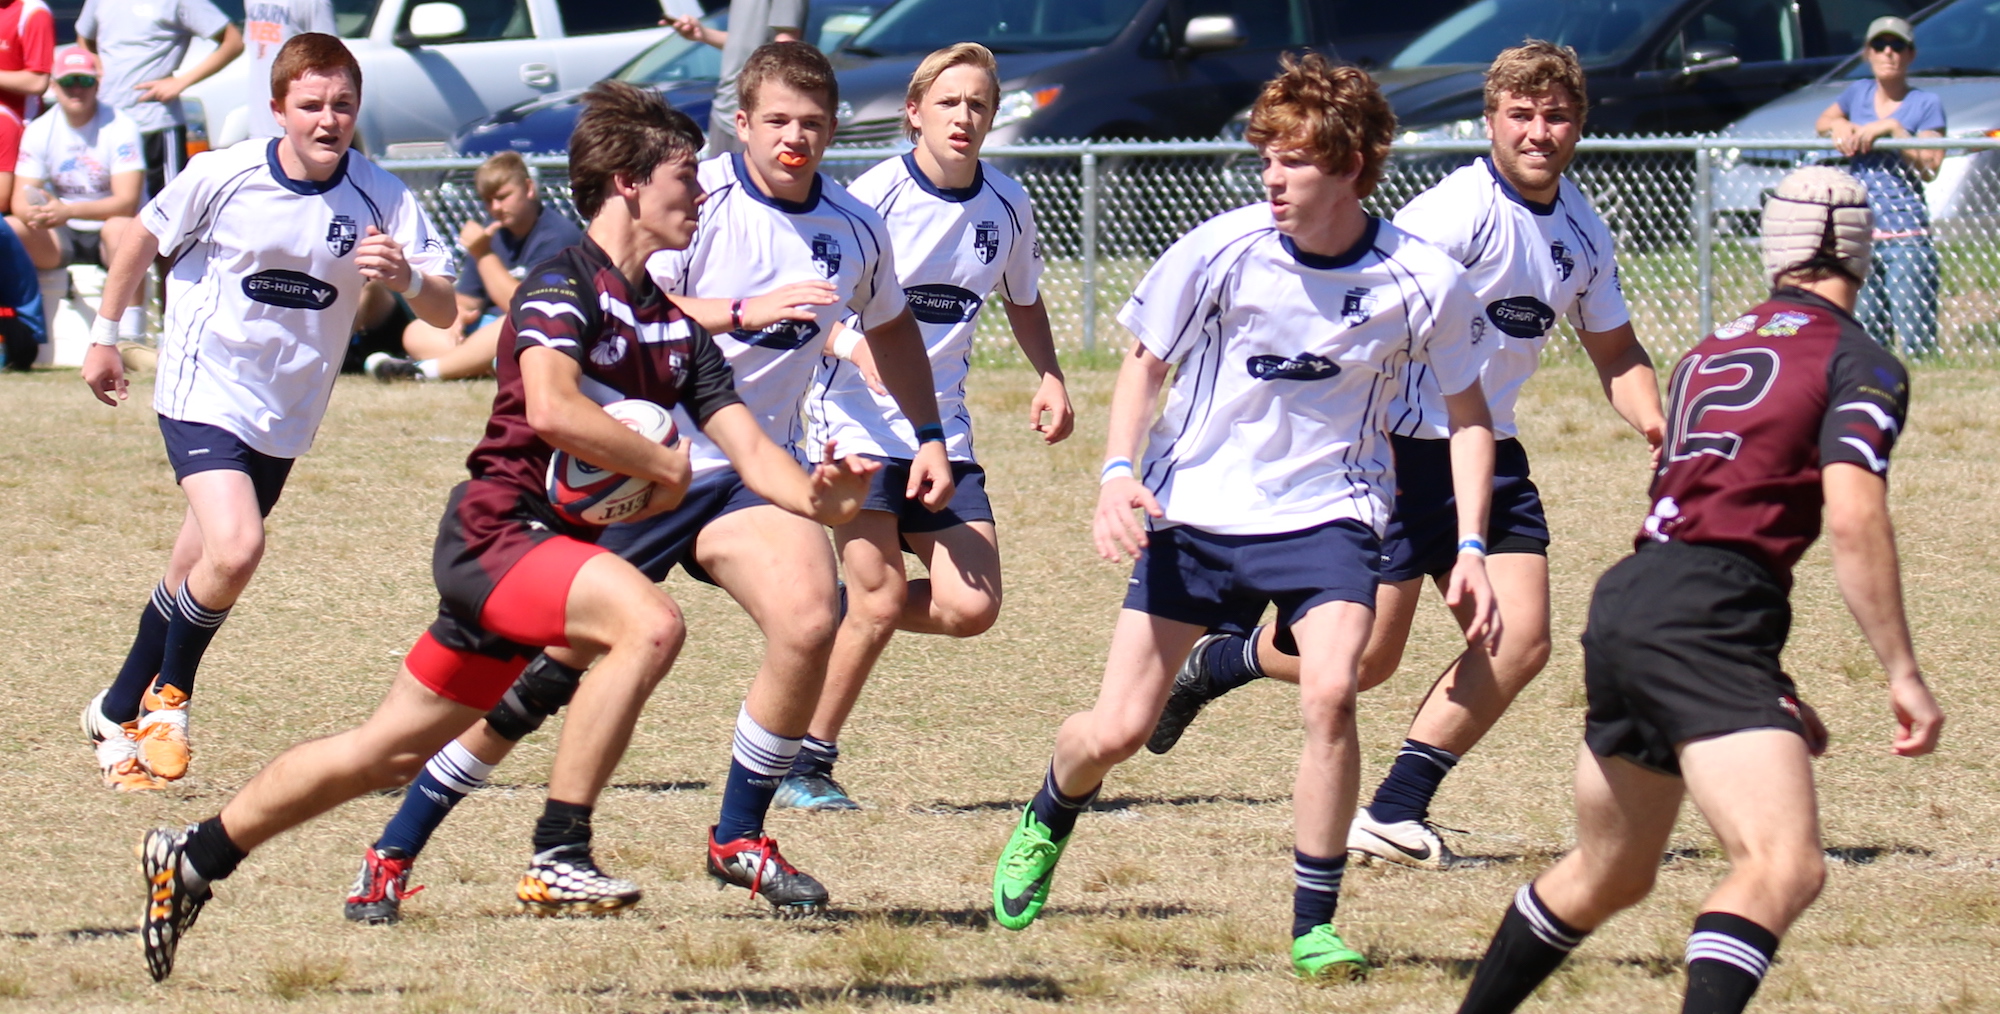 Wando rugby v South Greenville in South Carolina state rugby final 2017. Jamie Kingdom photo.